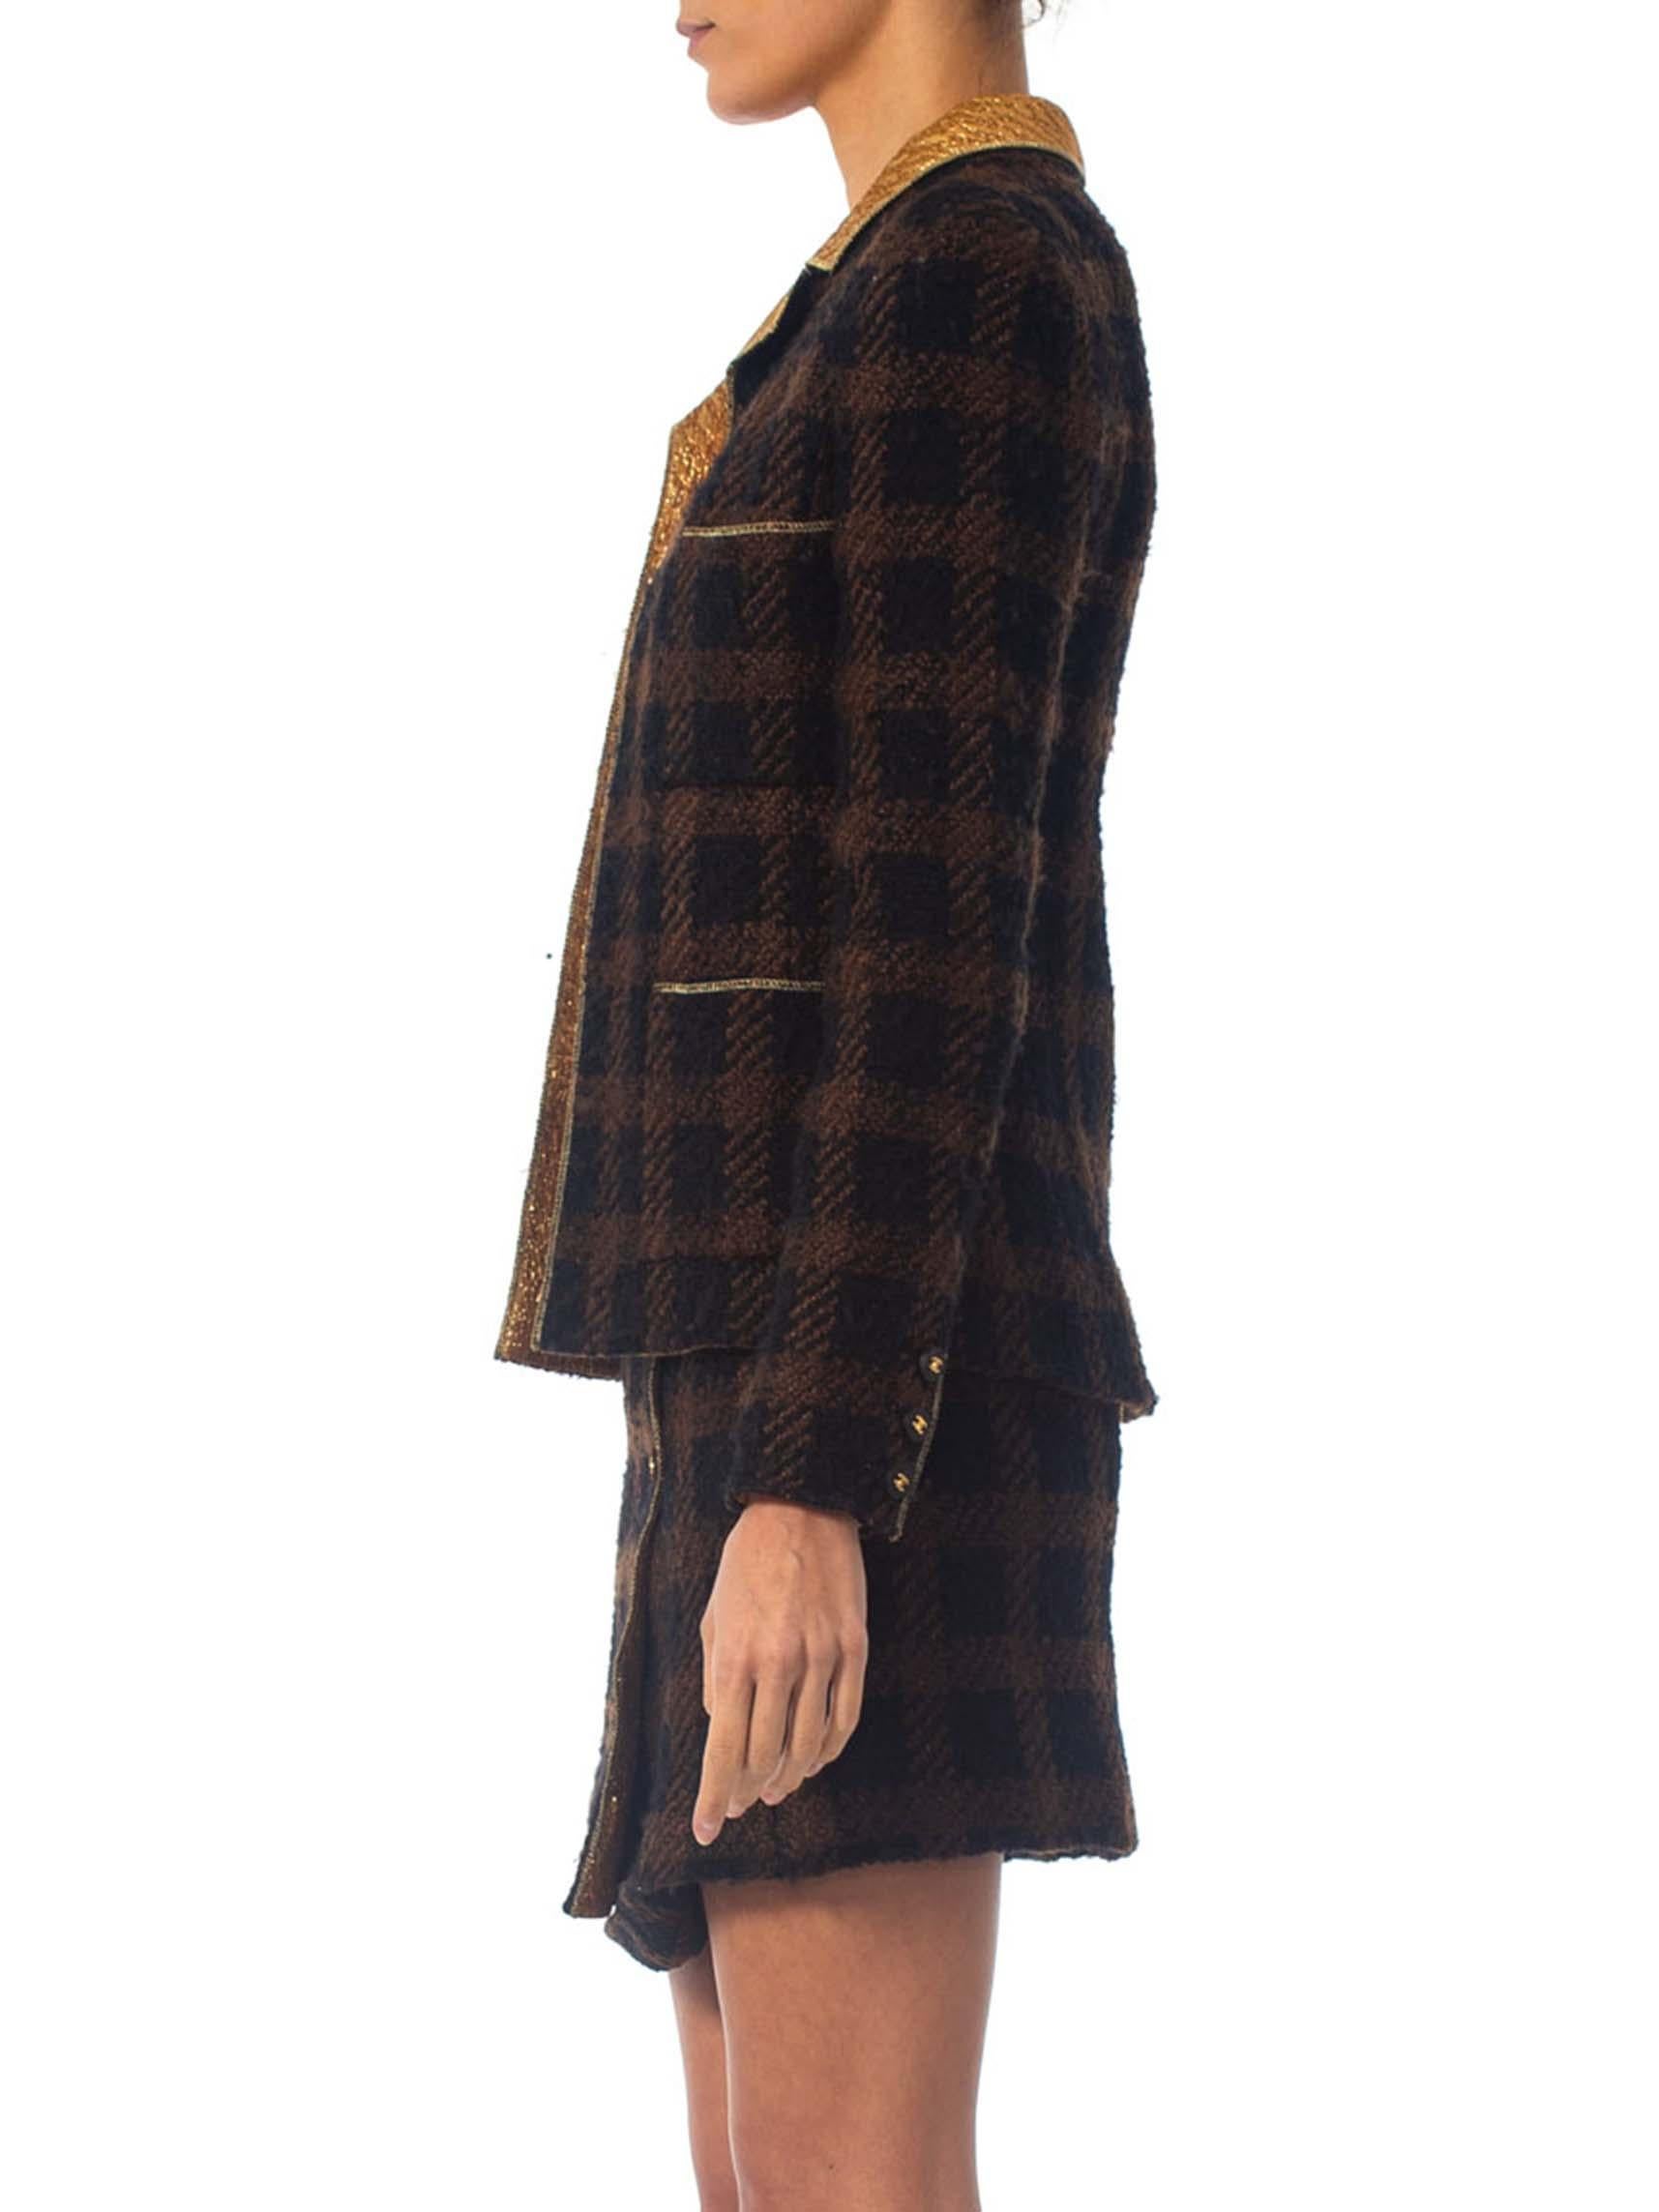 1990S CHANEL Black & Brown With  Gold Lamé Wool Mini Skirt Suit Lined In Silk In Excellent Condition For Sale In New York, NY